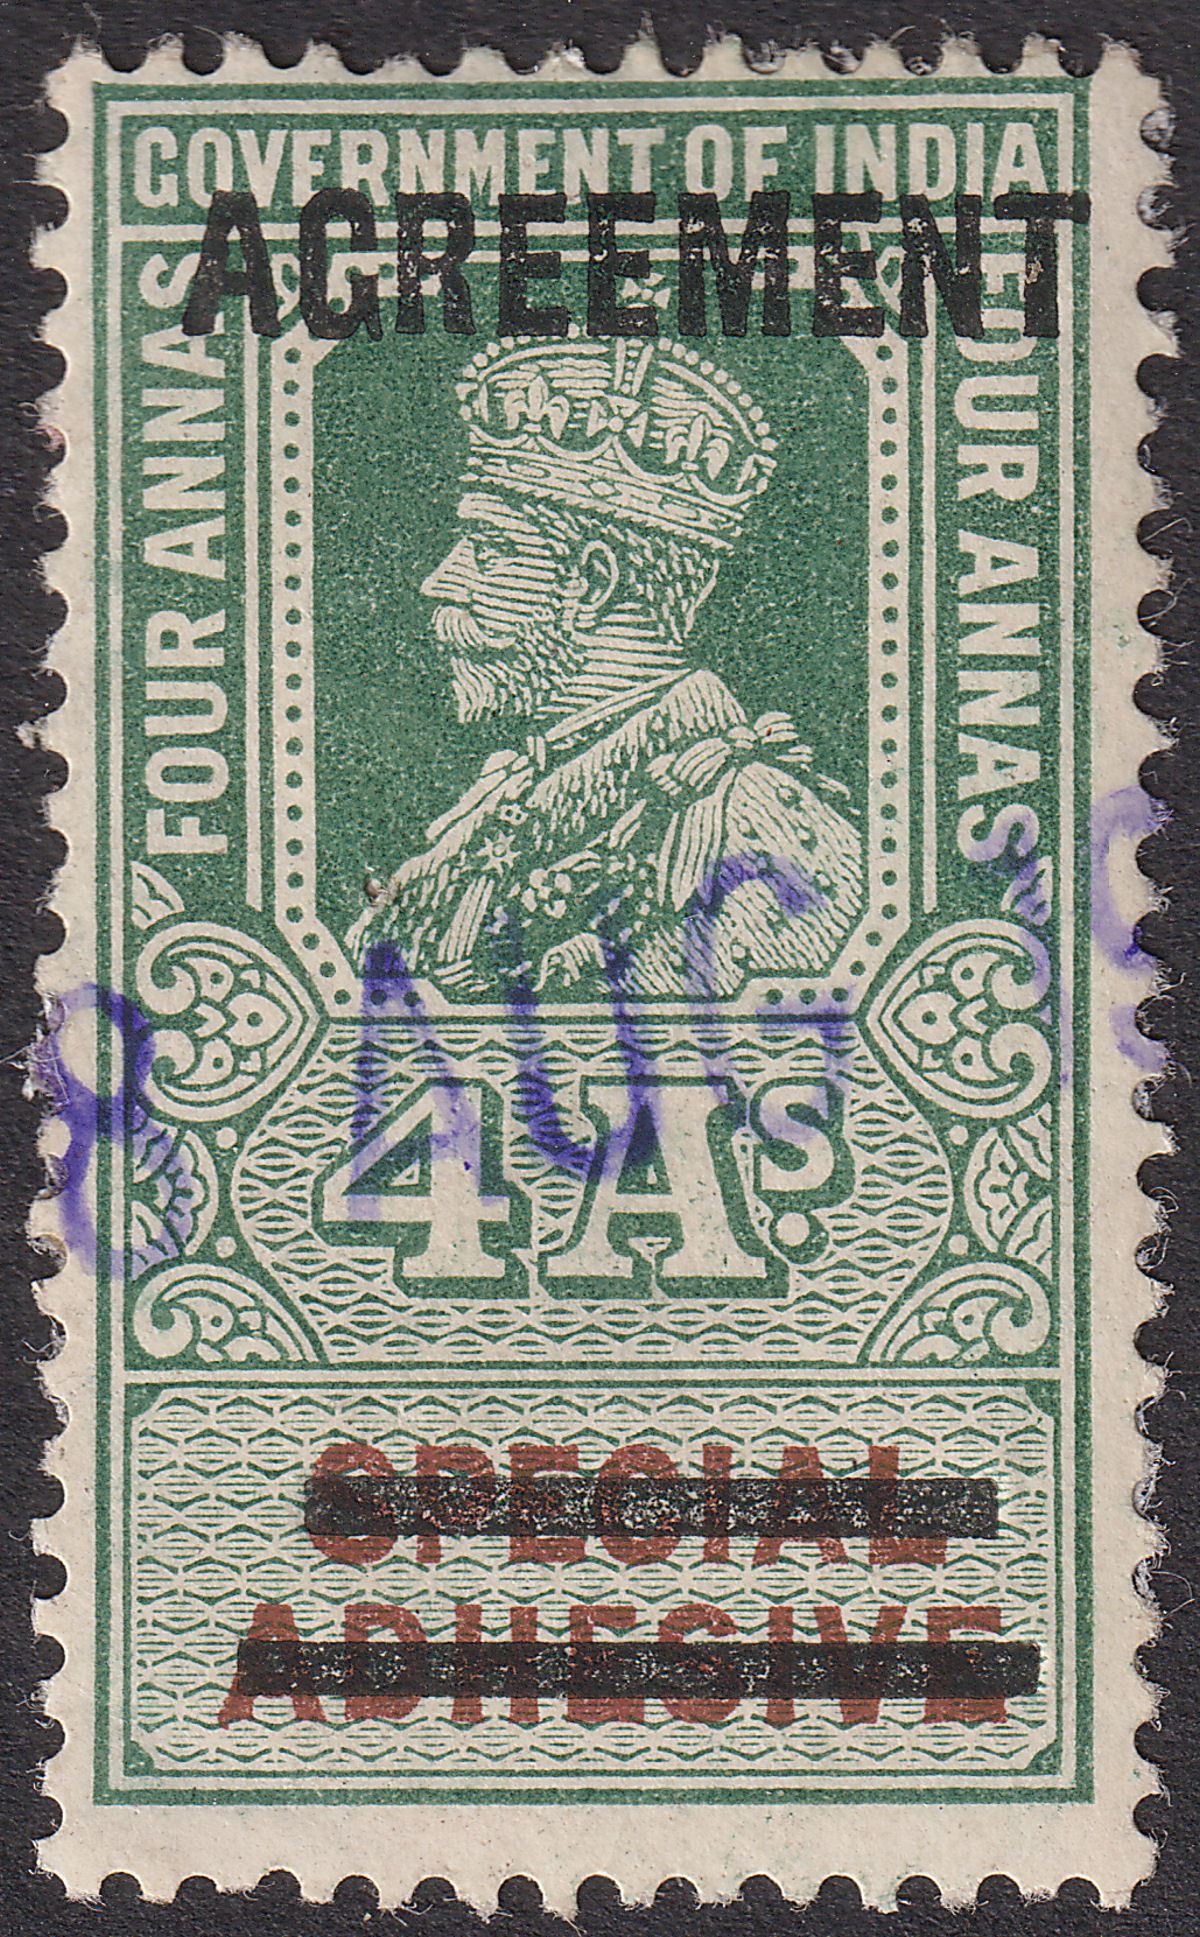 India 1914 KGV Revenue Agreement Provisional Overprint 4a Green + Brown Used BF2